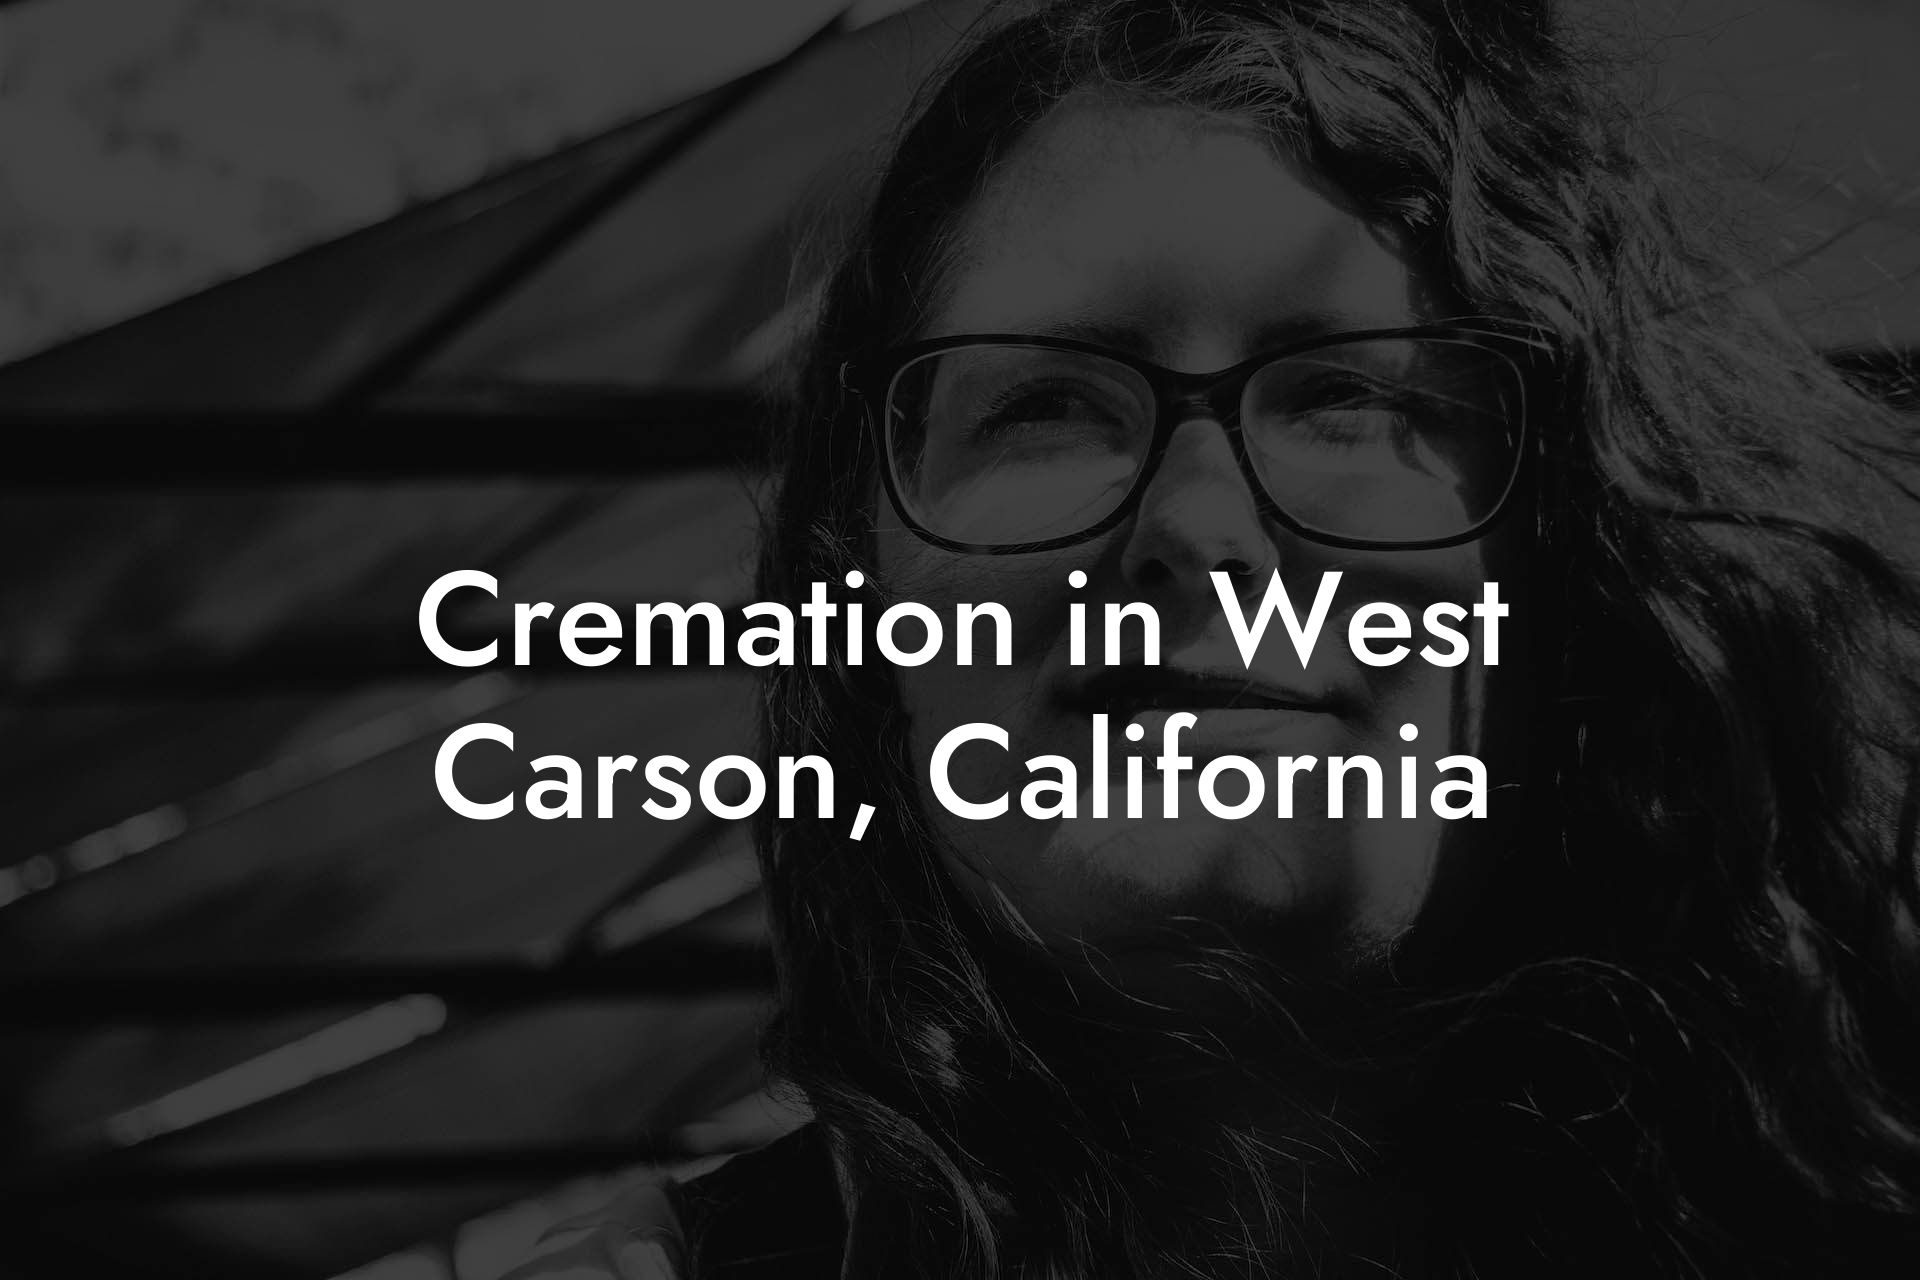 Cremation in West Carson, California